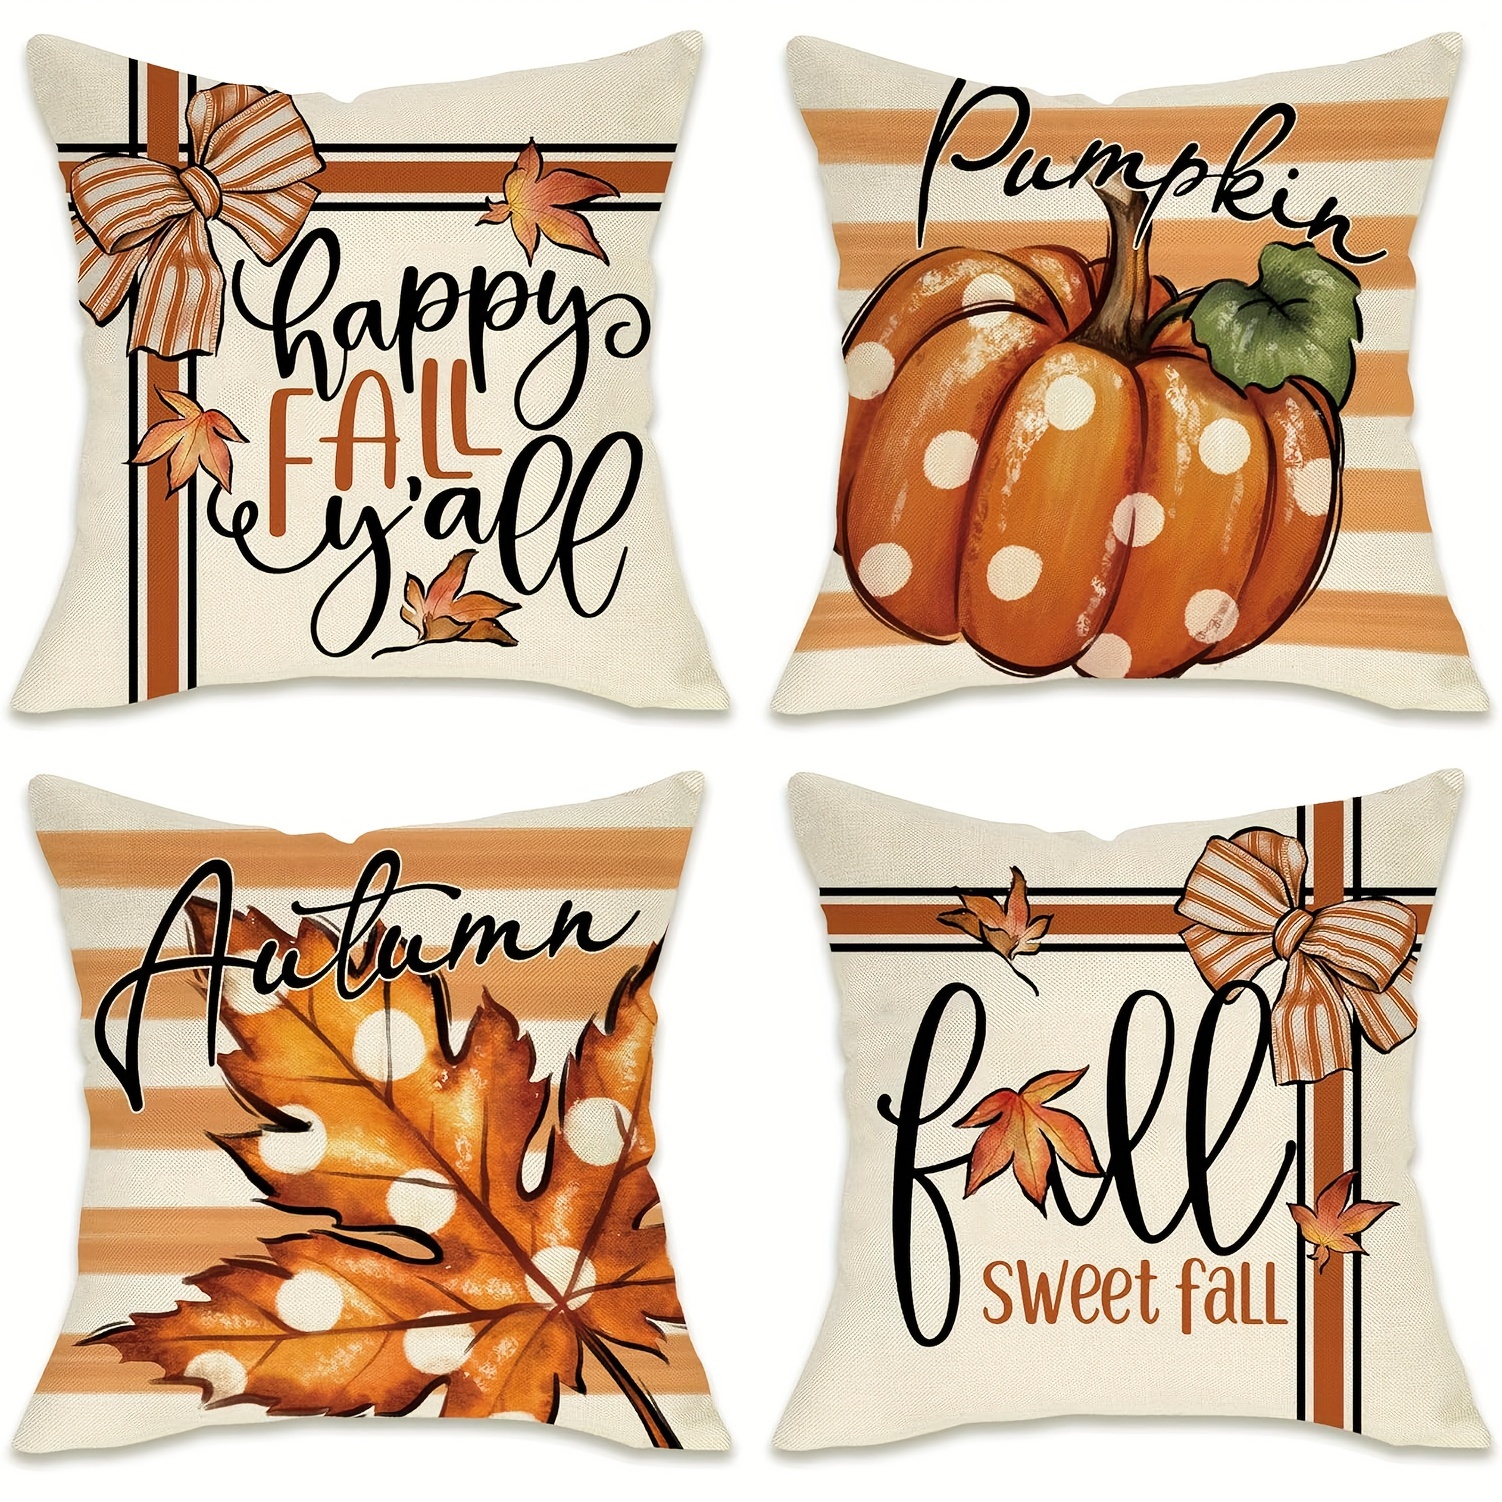 

4-pack Autumn Theme Throw Pillow Covers 18x18 Inch, Polyester Farmhouse Thanksgiving Cushion Cases With Zipper, Contemporary Machine-washable Covers, Woven Pumpkin & Maple Leaf Designs For Home Decor